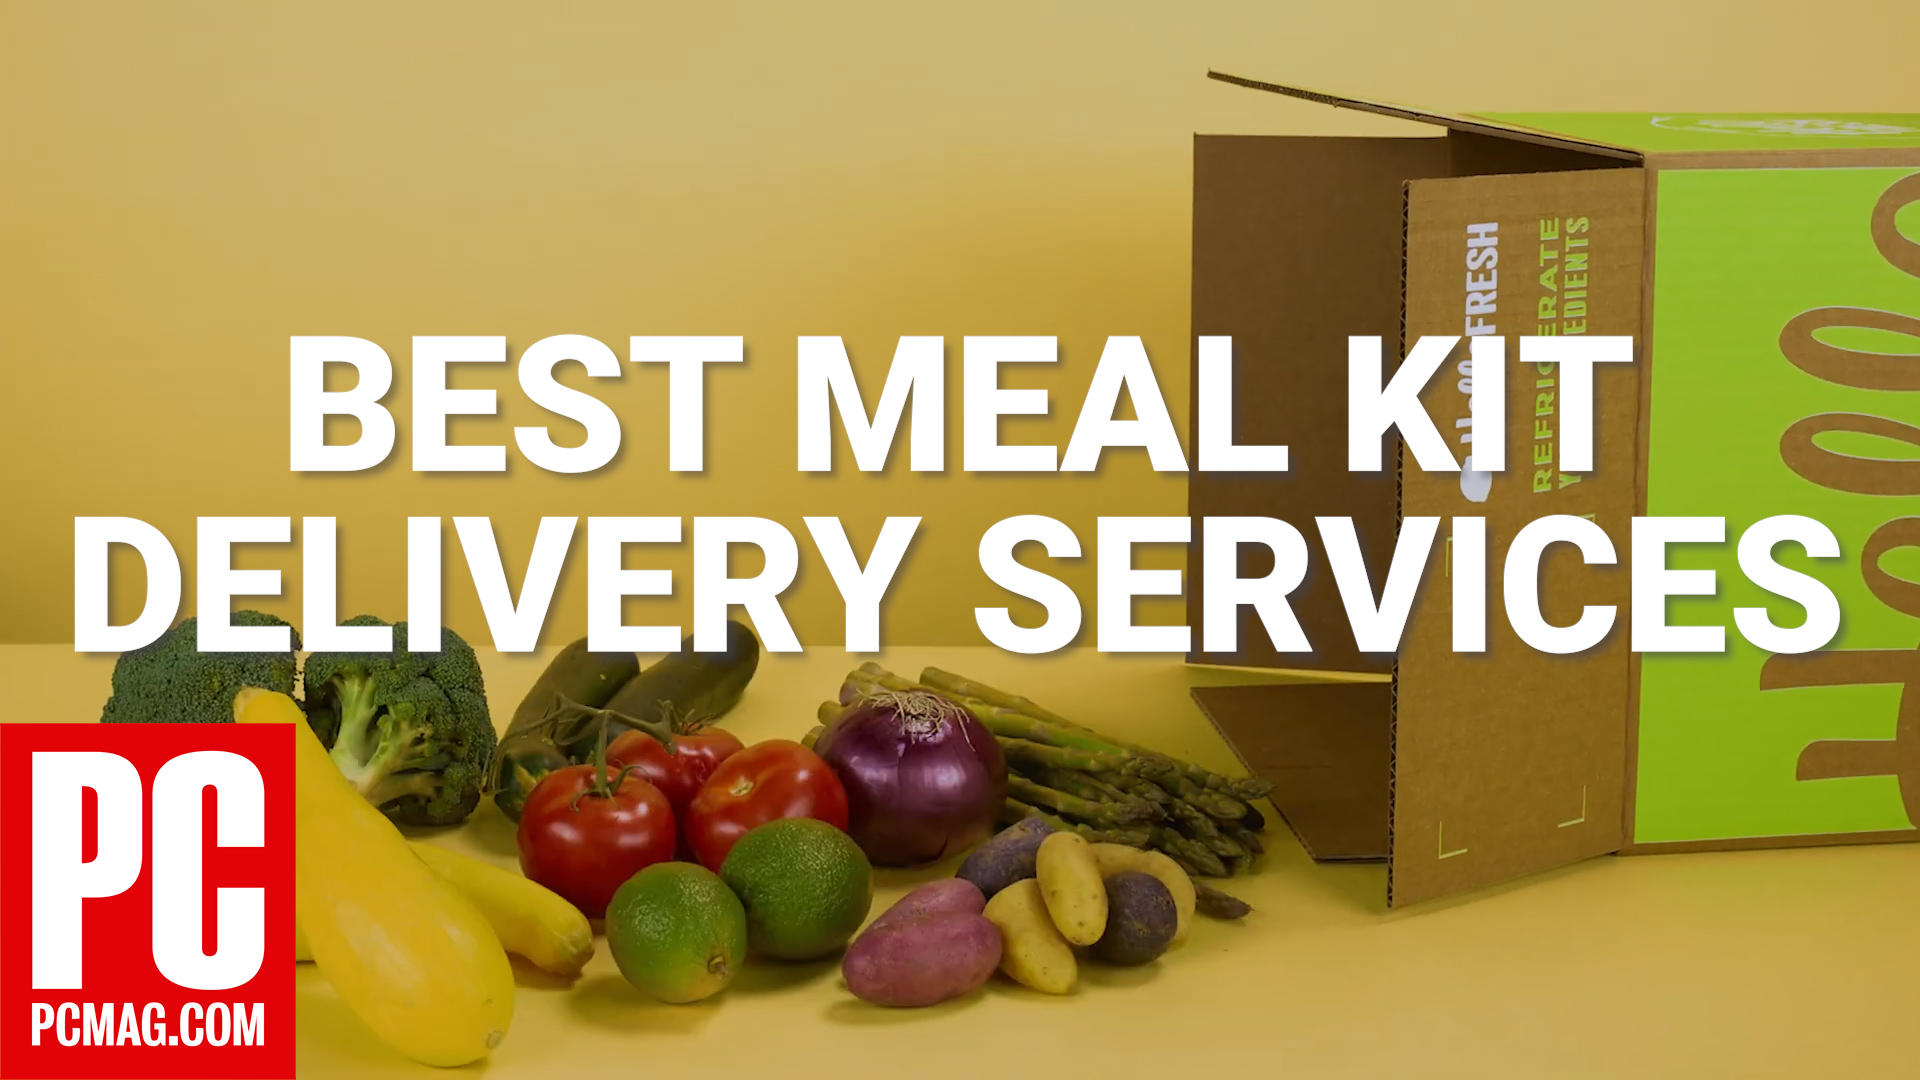 Best Meal Delivery Services for 2020